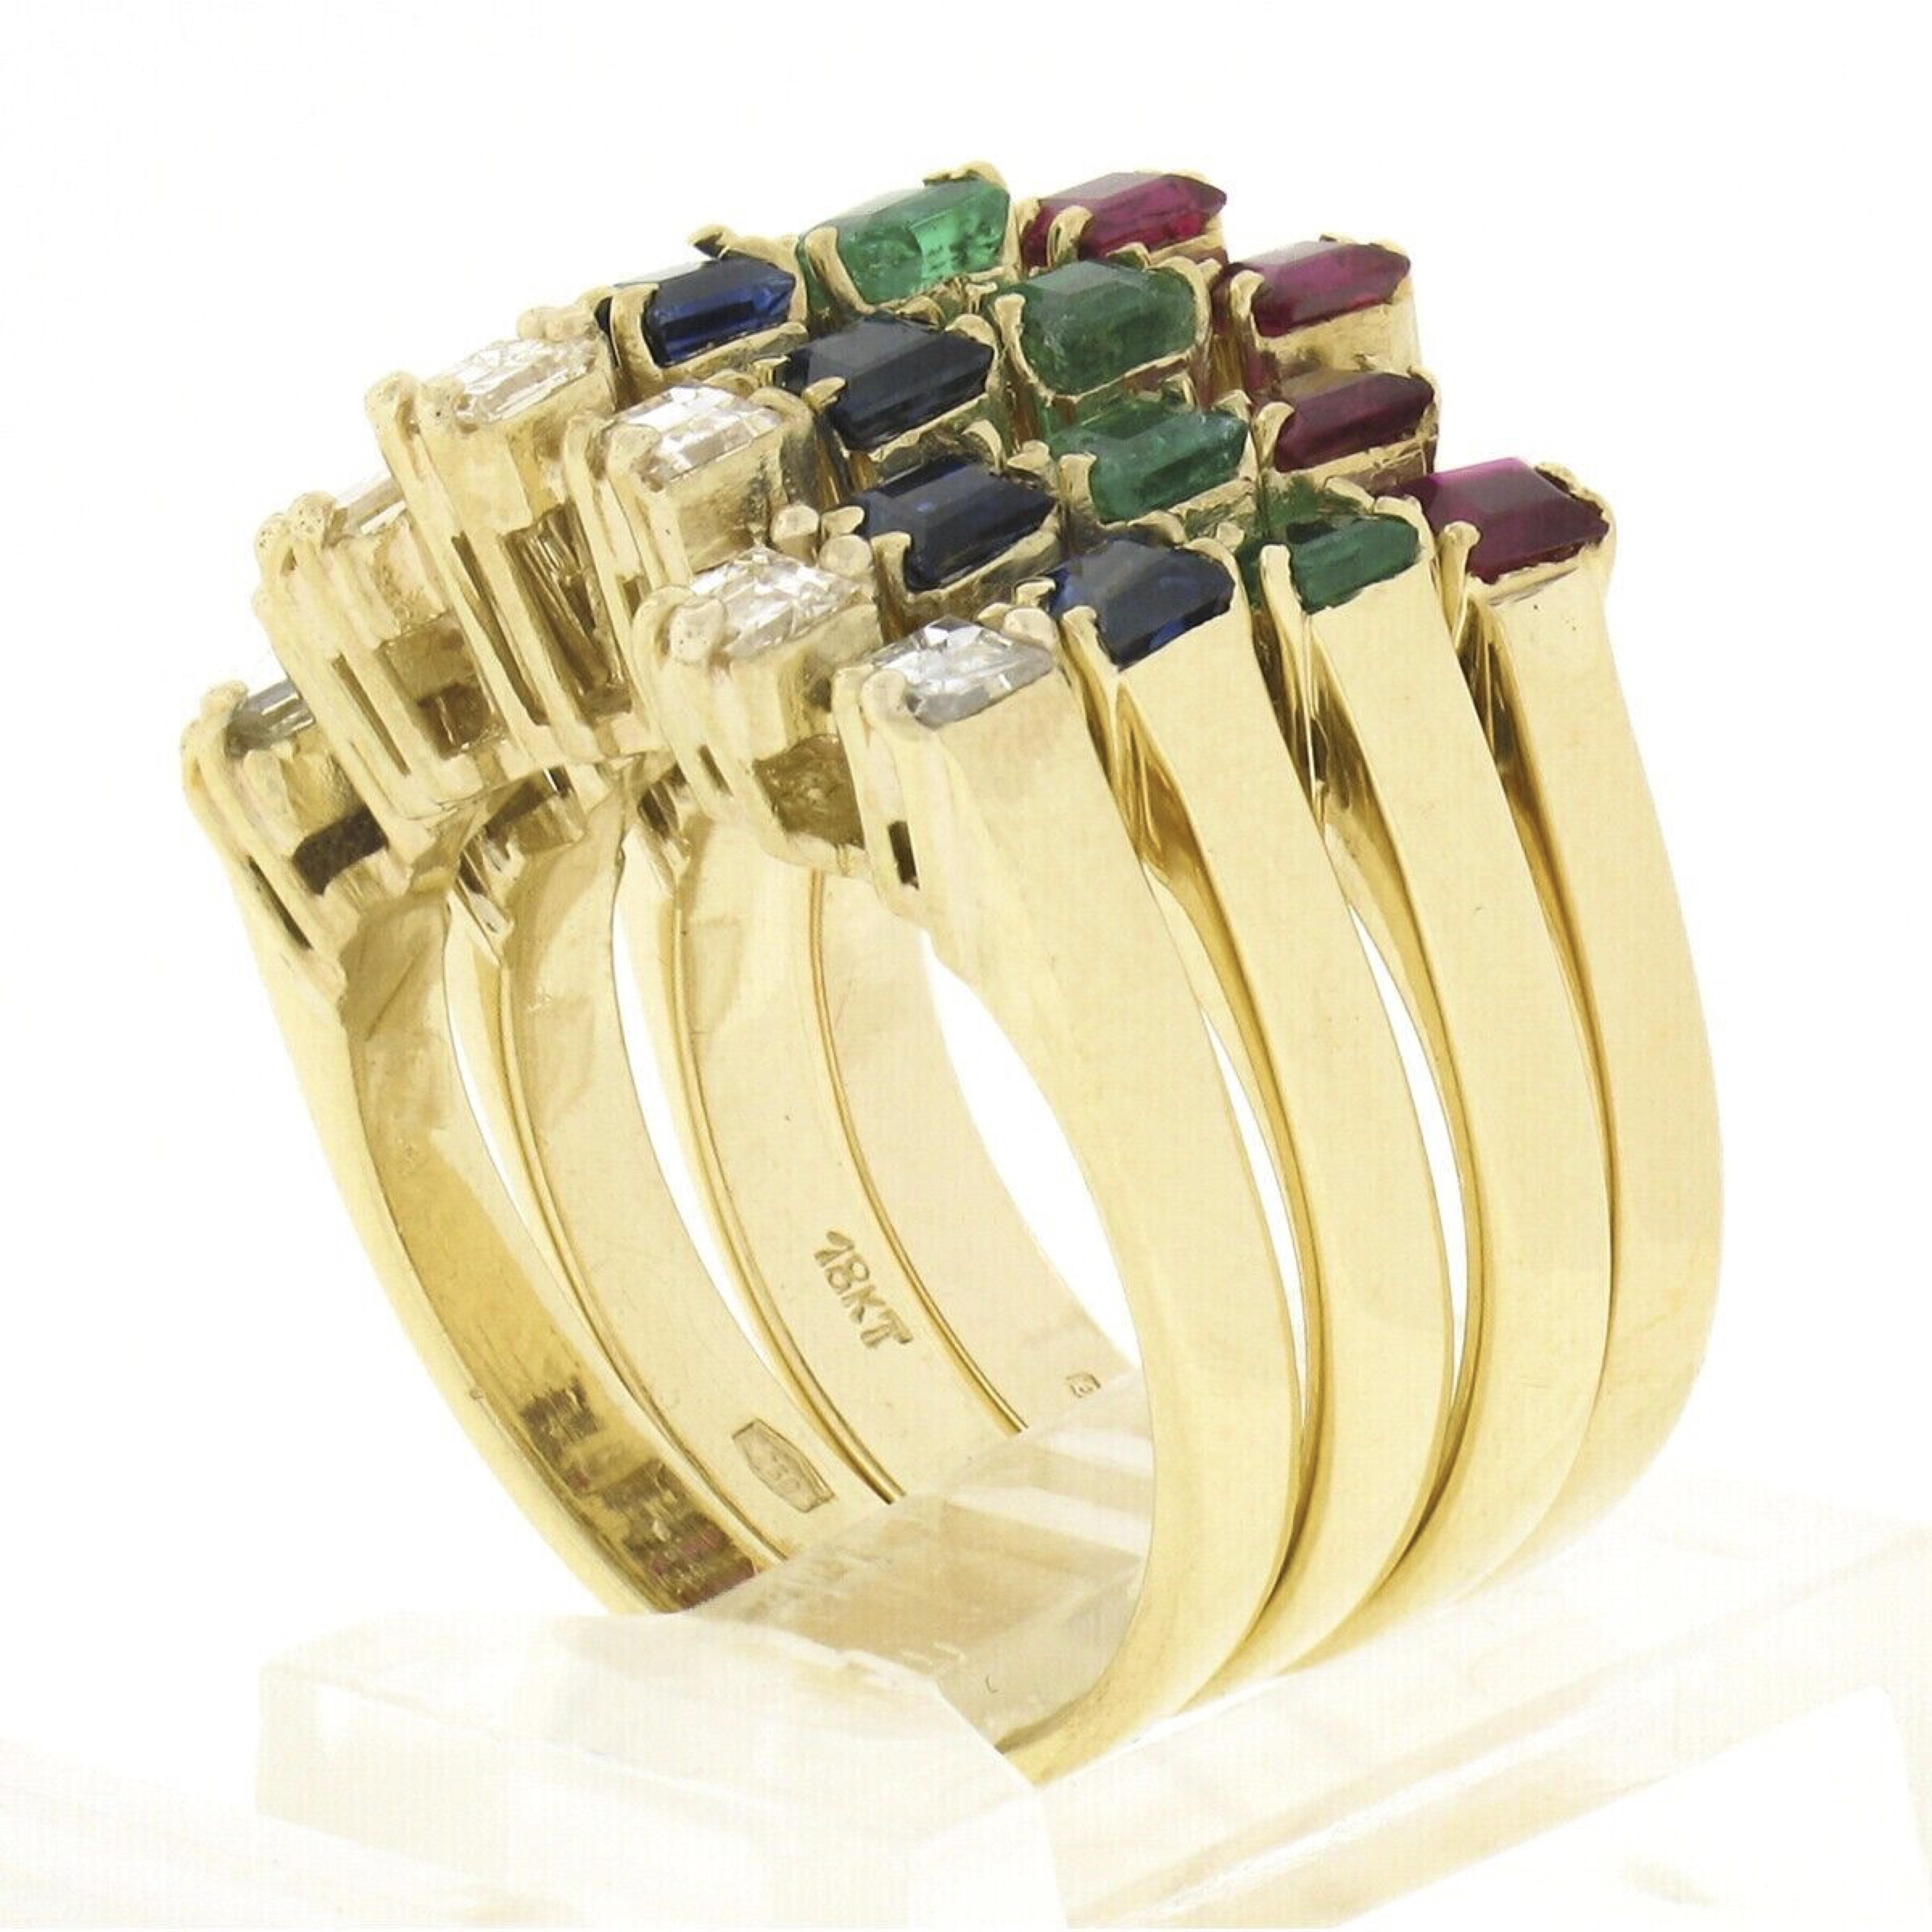 '4' 18k Gold Square Step Diamond Ruby Sapphire & Emerald Puzzle Stack Band Rings 1